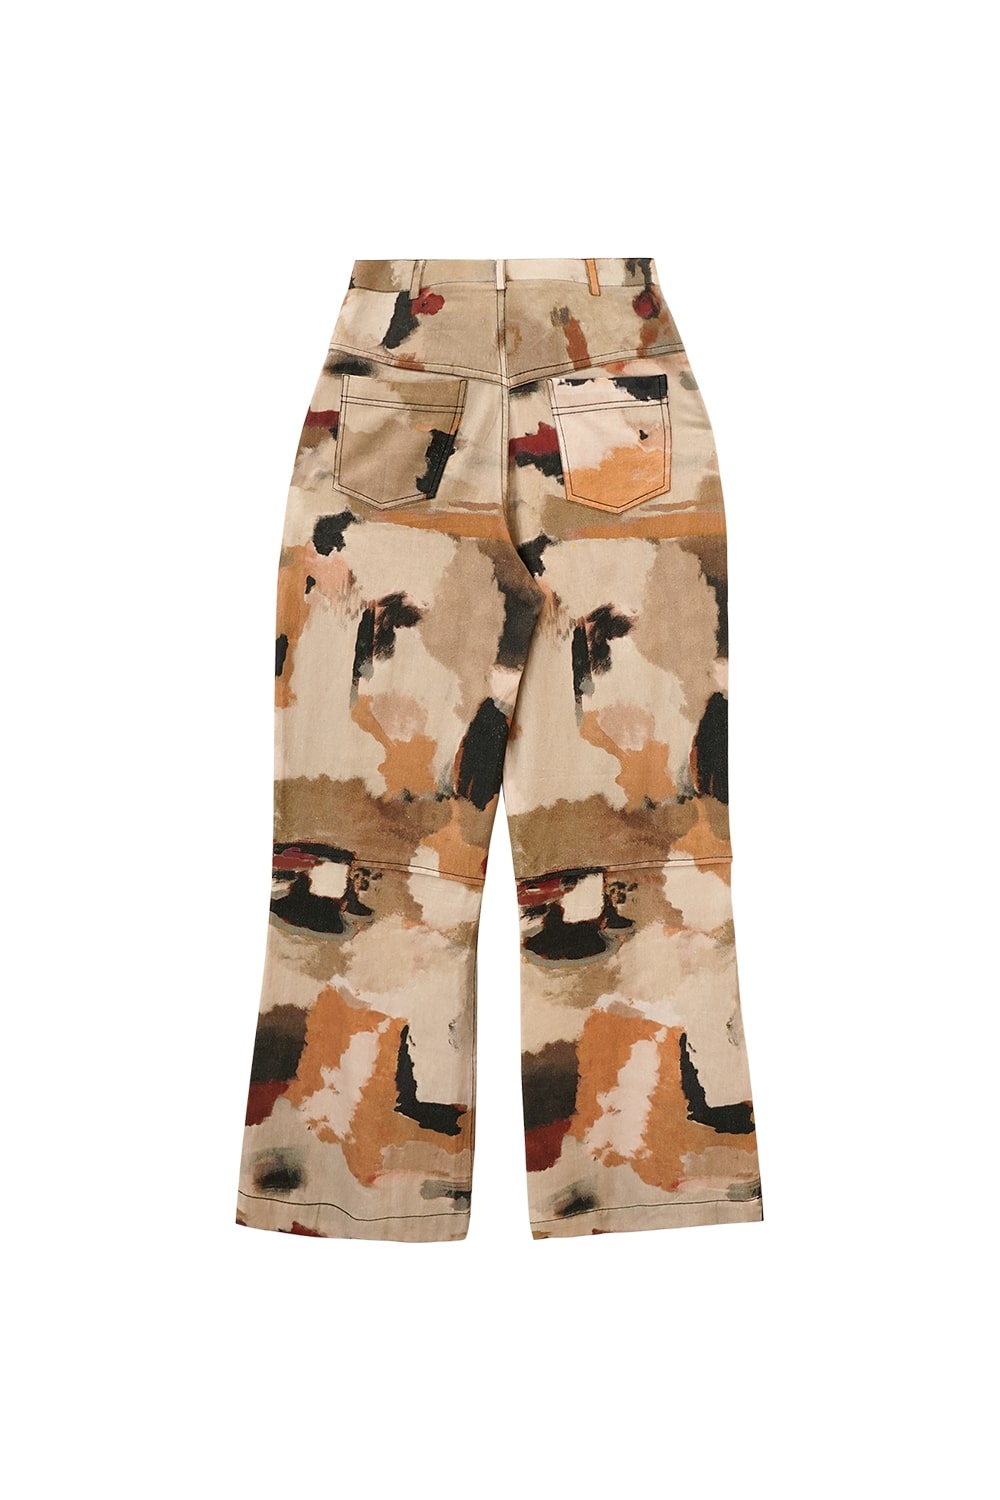 Rebirth Seltzer Trousers